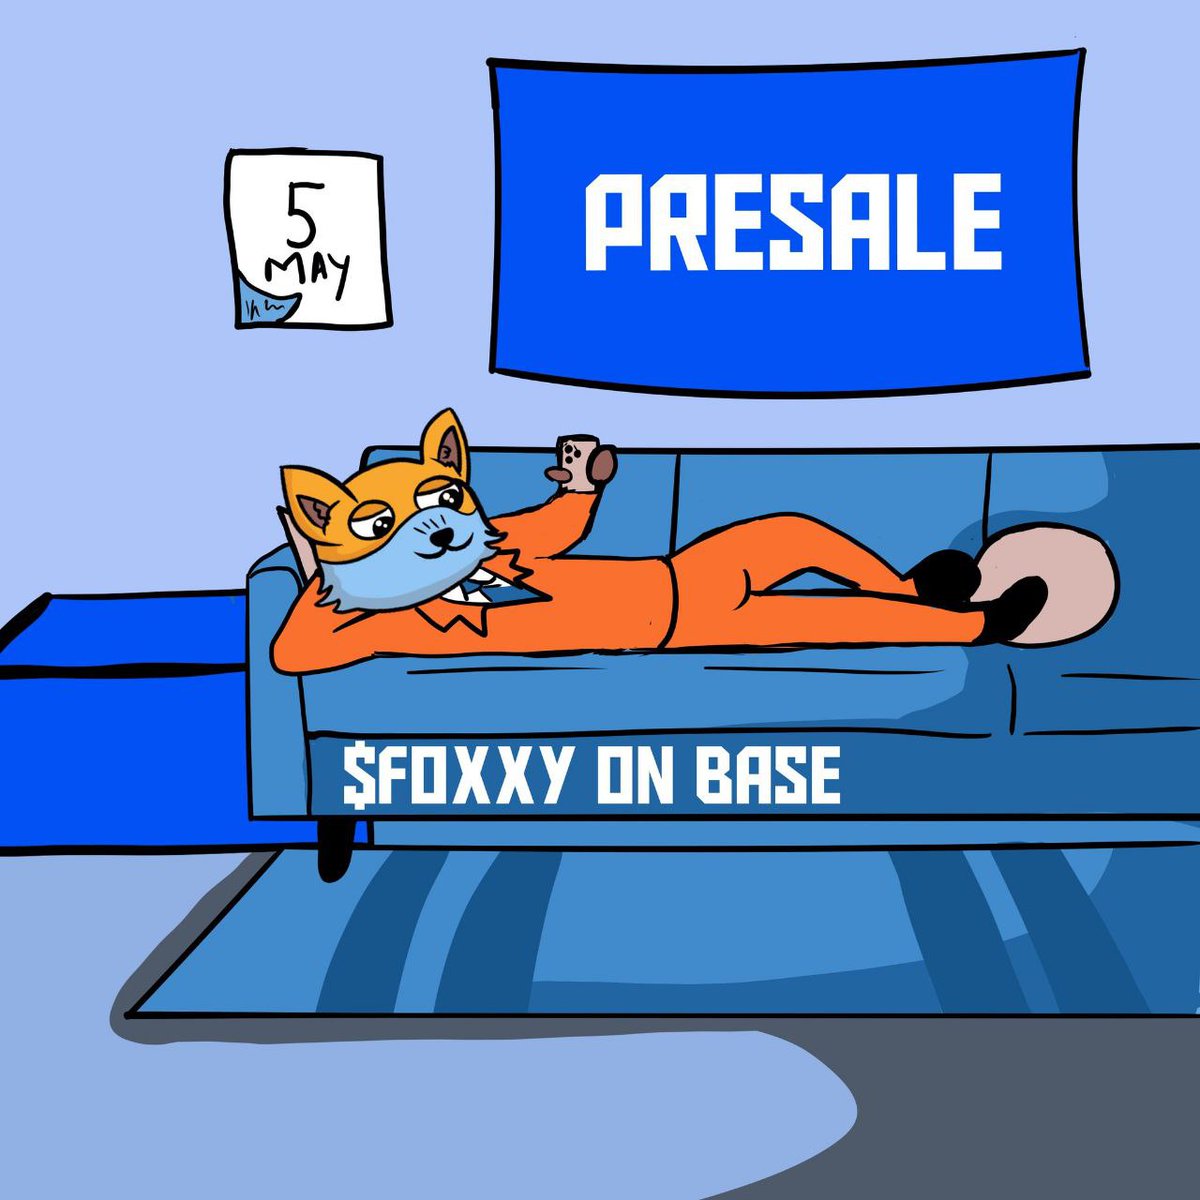 $700 $FOXXY • 15 Days 🦊✨ - RT & Follow @FOXXYONBASE _________ Presale starts 5th May Live on Uniswap on May 9th Listing price around 0.01 🚀 Winner paid in 70000 $FOXXY tokens (Around $700)